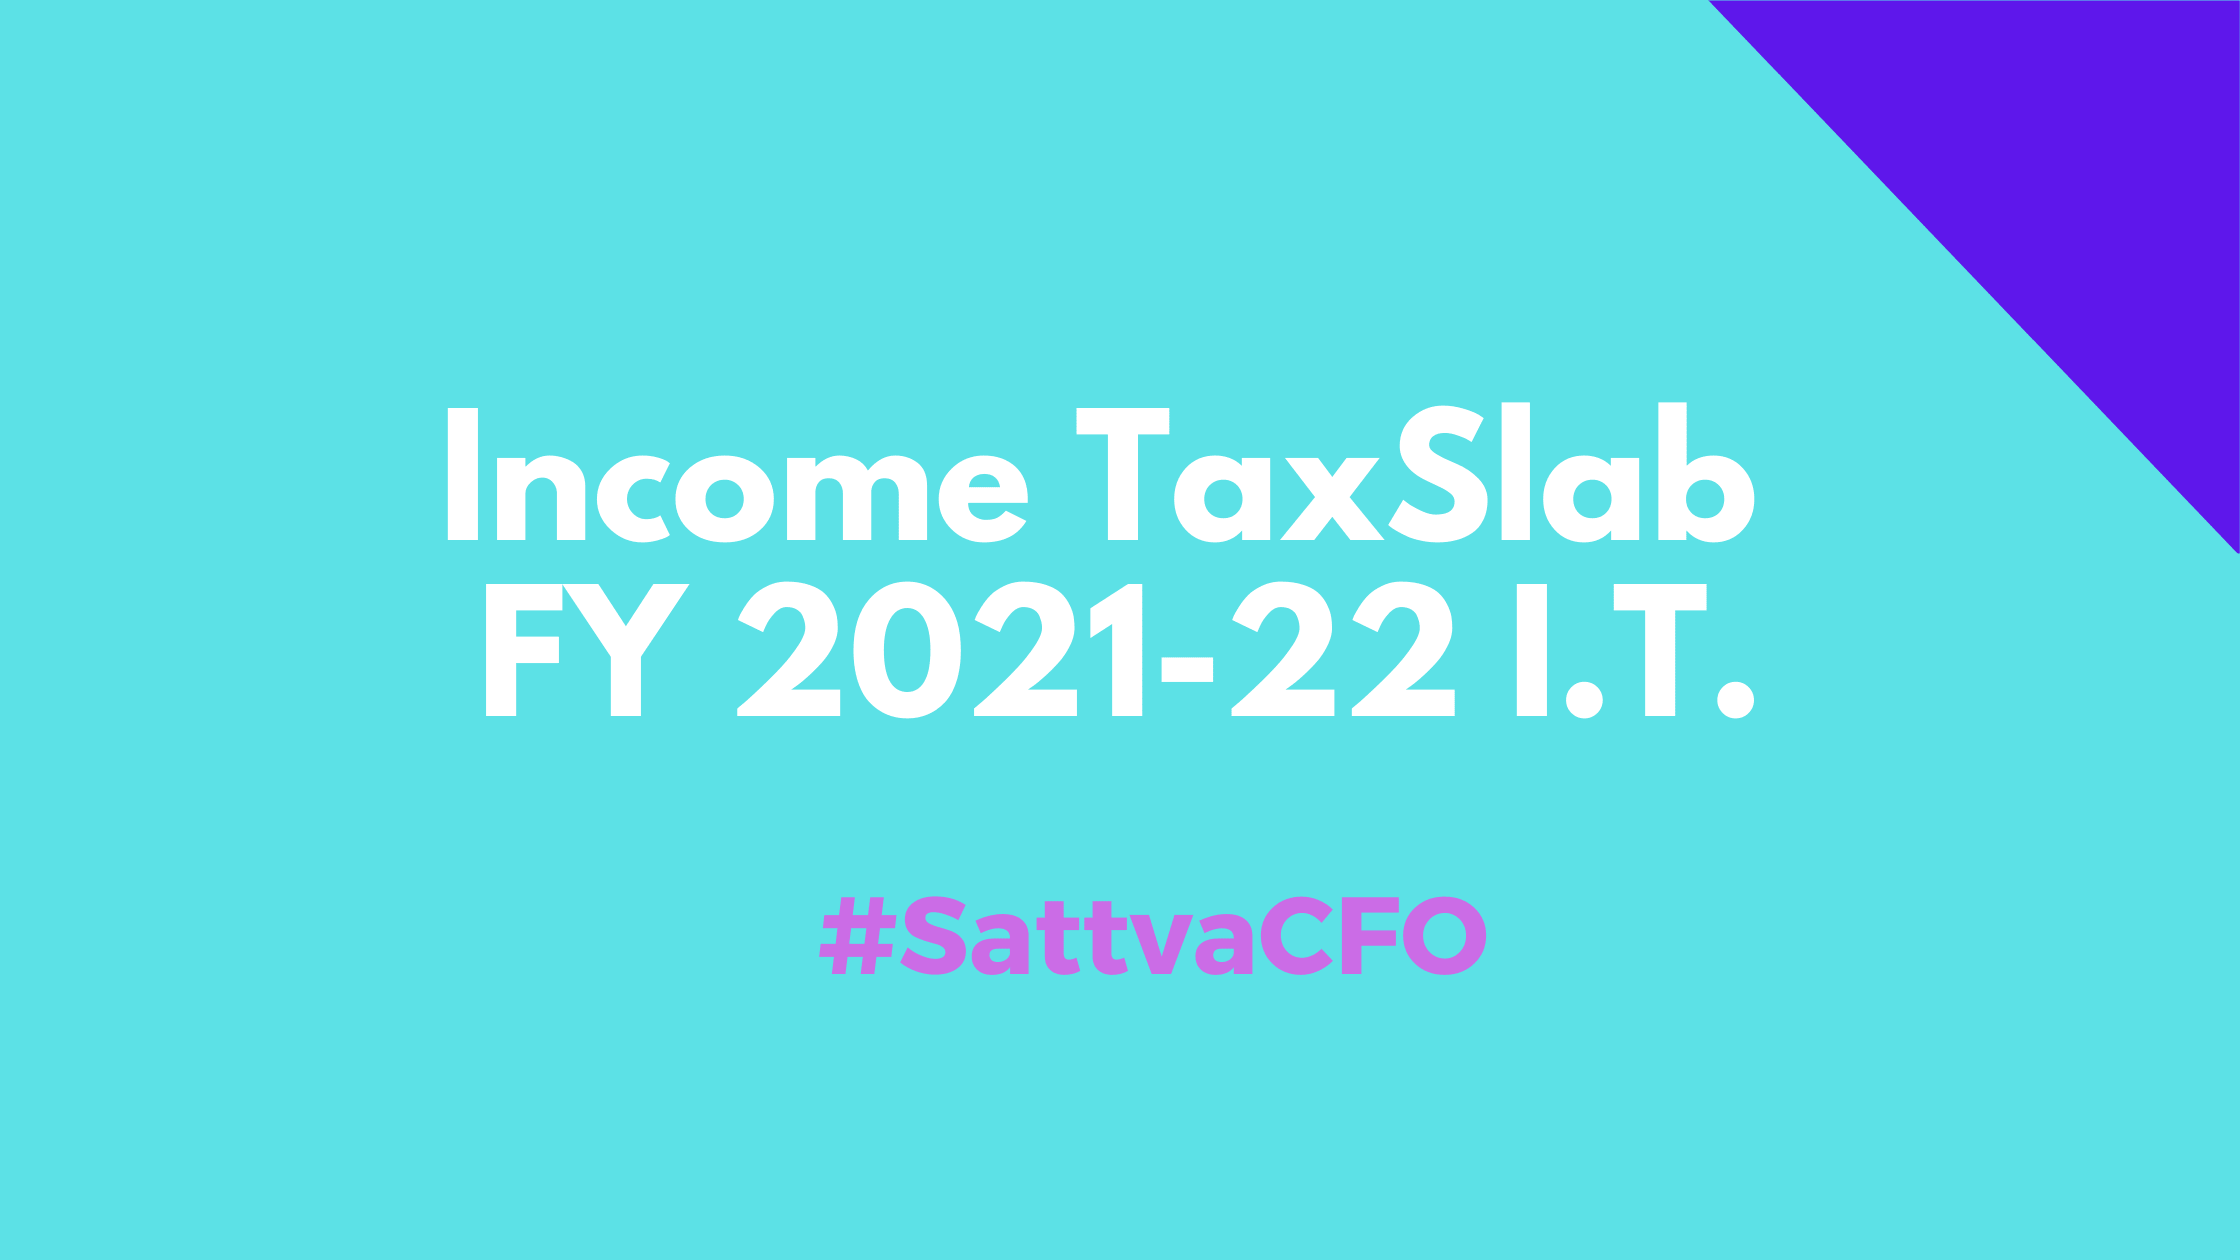 INCOME TAX SLABS FY 2021-22